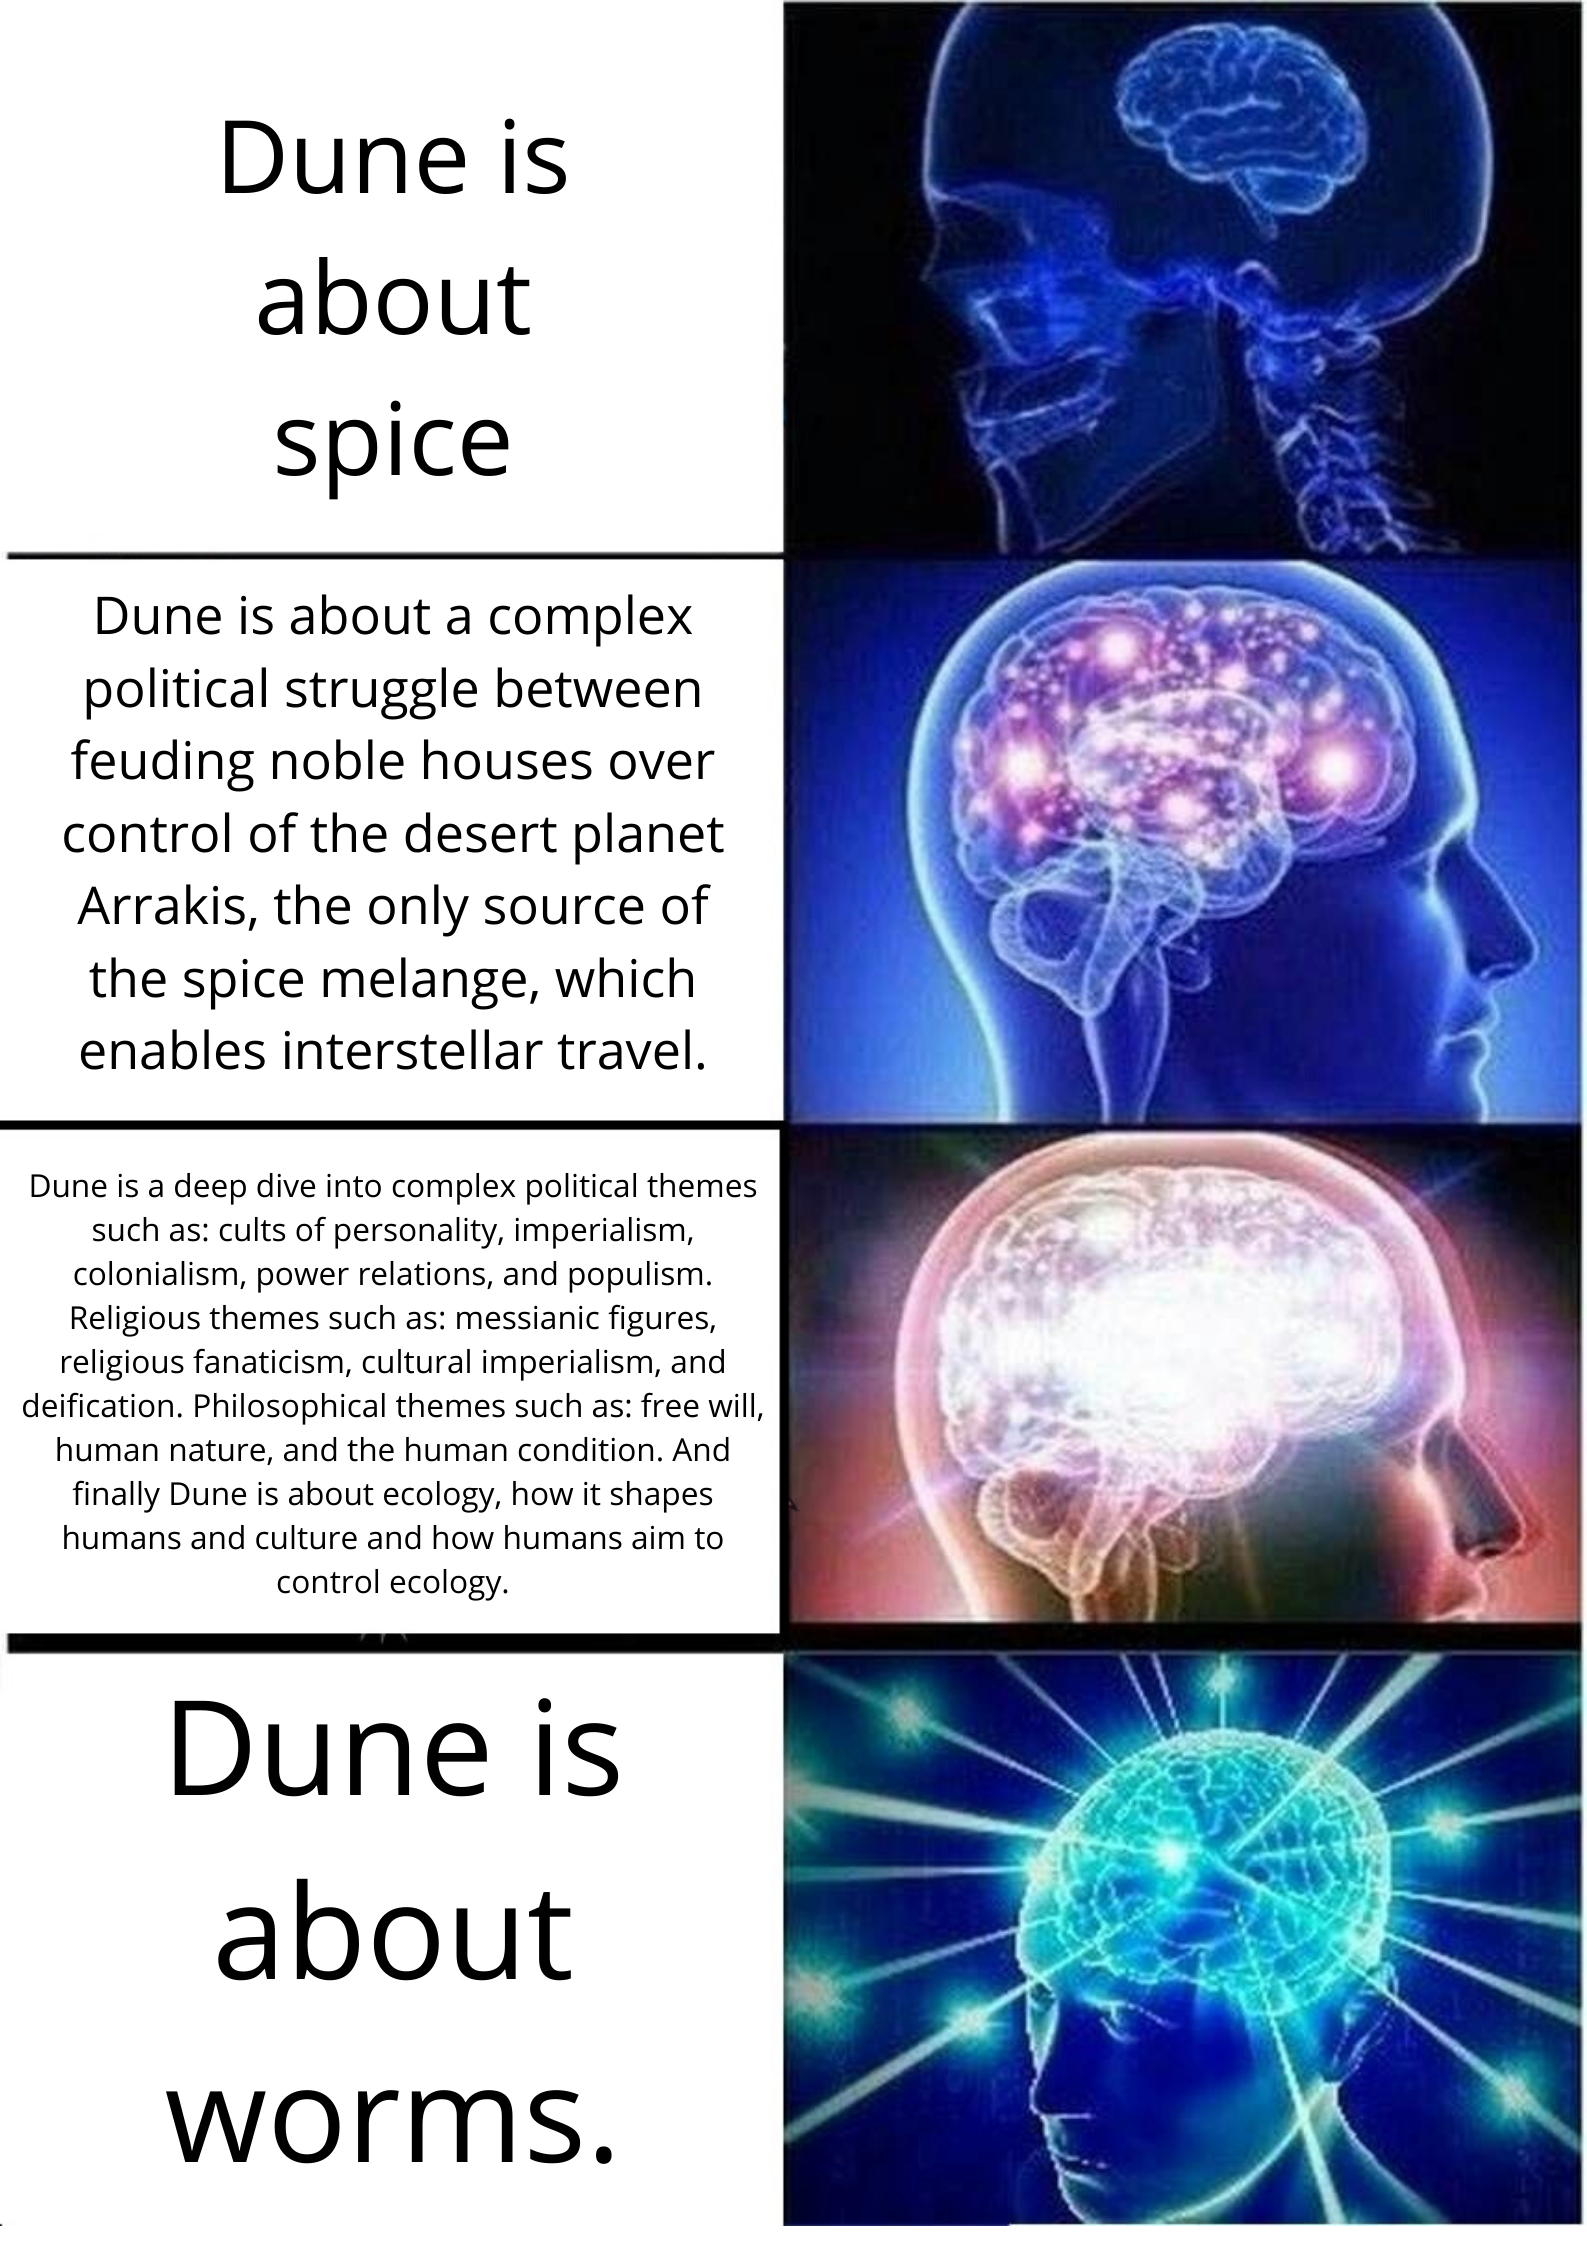 Dune Thoughts feature image